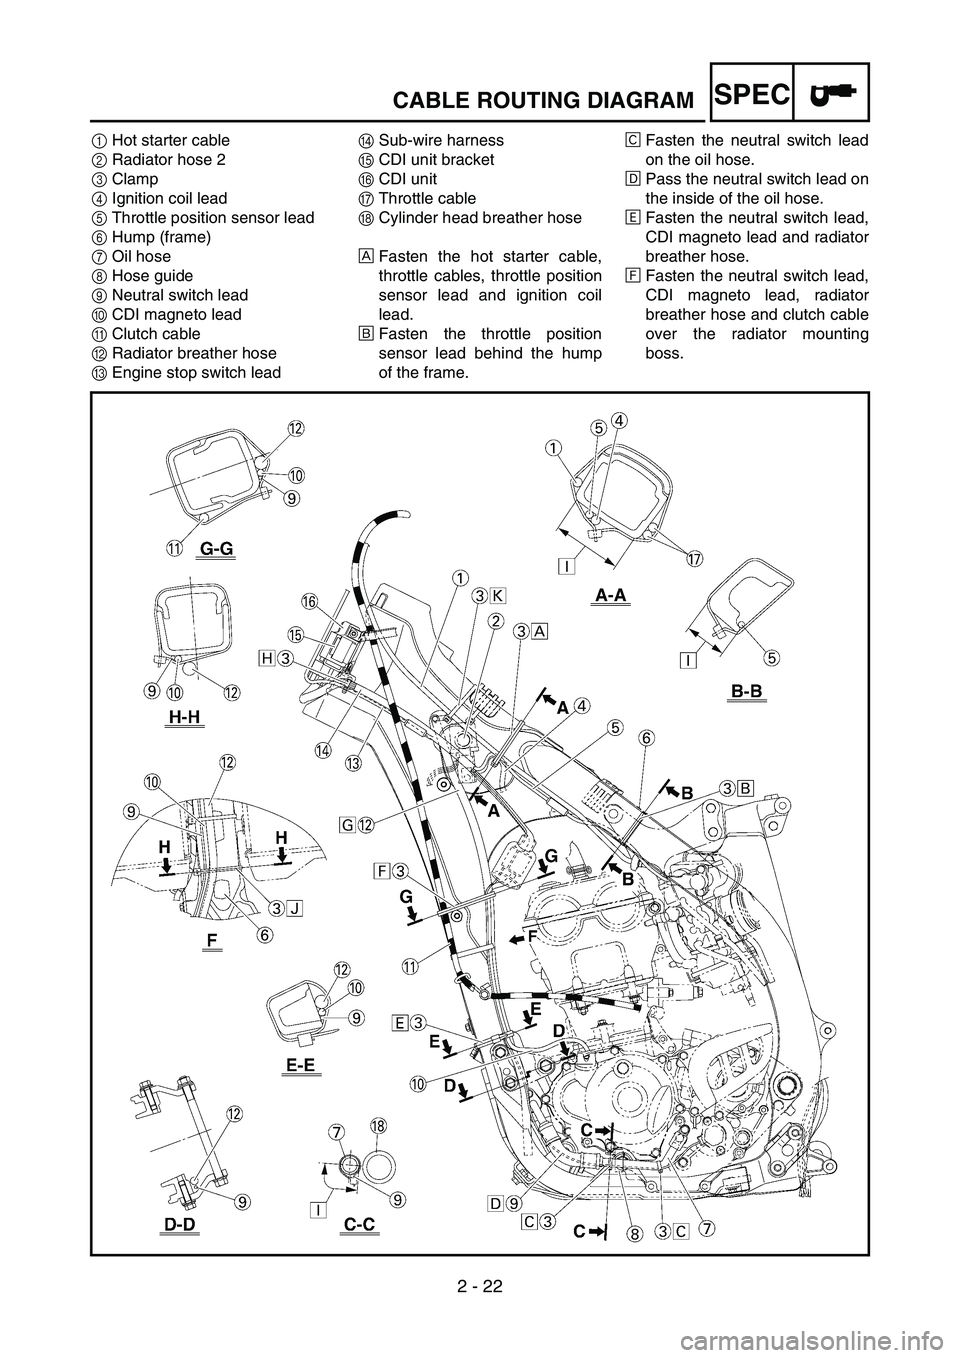 YAMAHA YZ250F 2007  Owners Manual 2 - 22
SPECCABLE ROUTING DIAGRAM
1Hot starter cable
2Radiator hose 2
3Clamp
4Ignition coil lead
5Throttle position sensor lead
6Hump (frame)
7Oil hose
8Hose guide
9Neutral switch lead
0CDI magneto lea